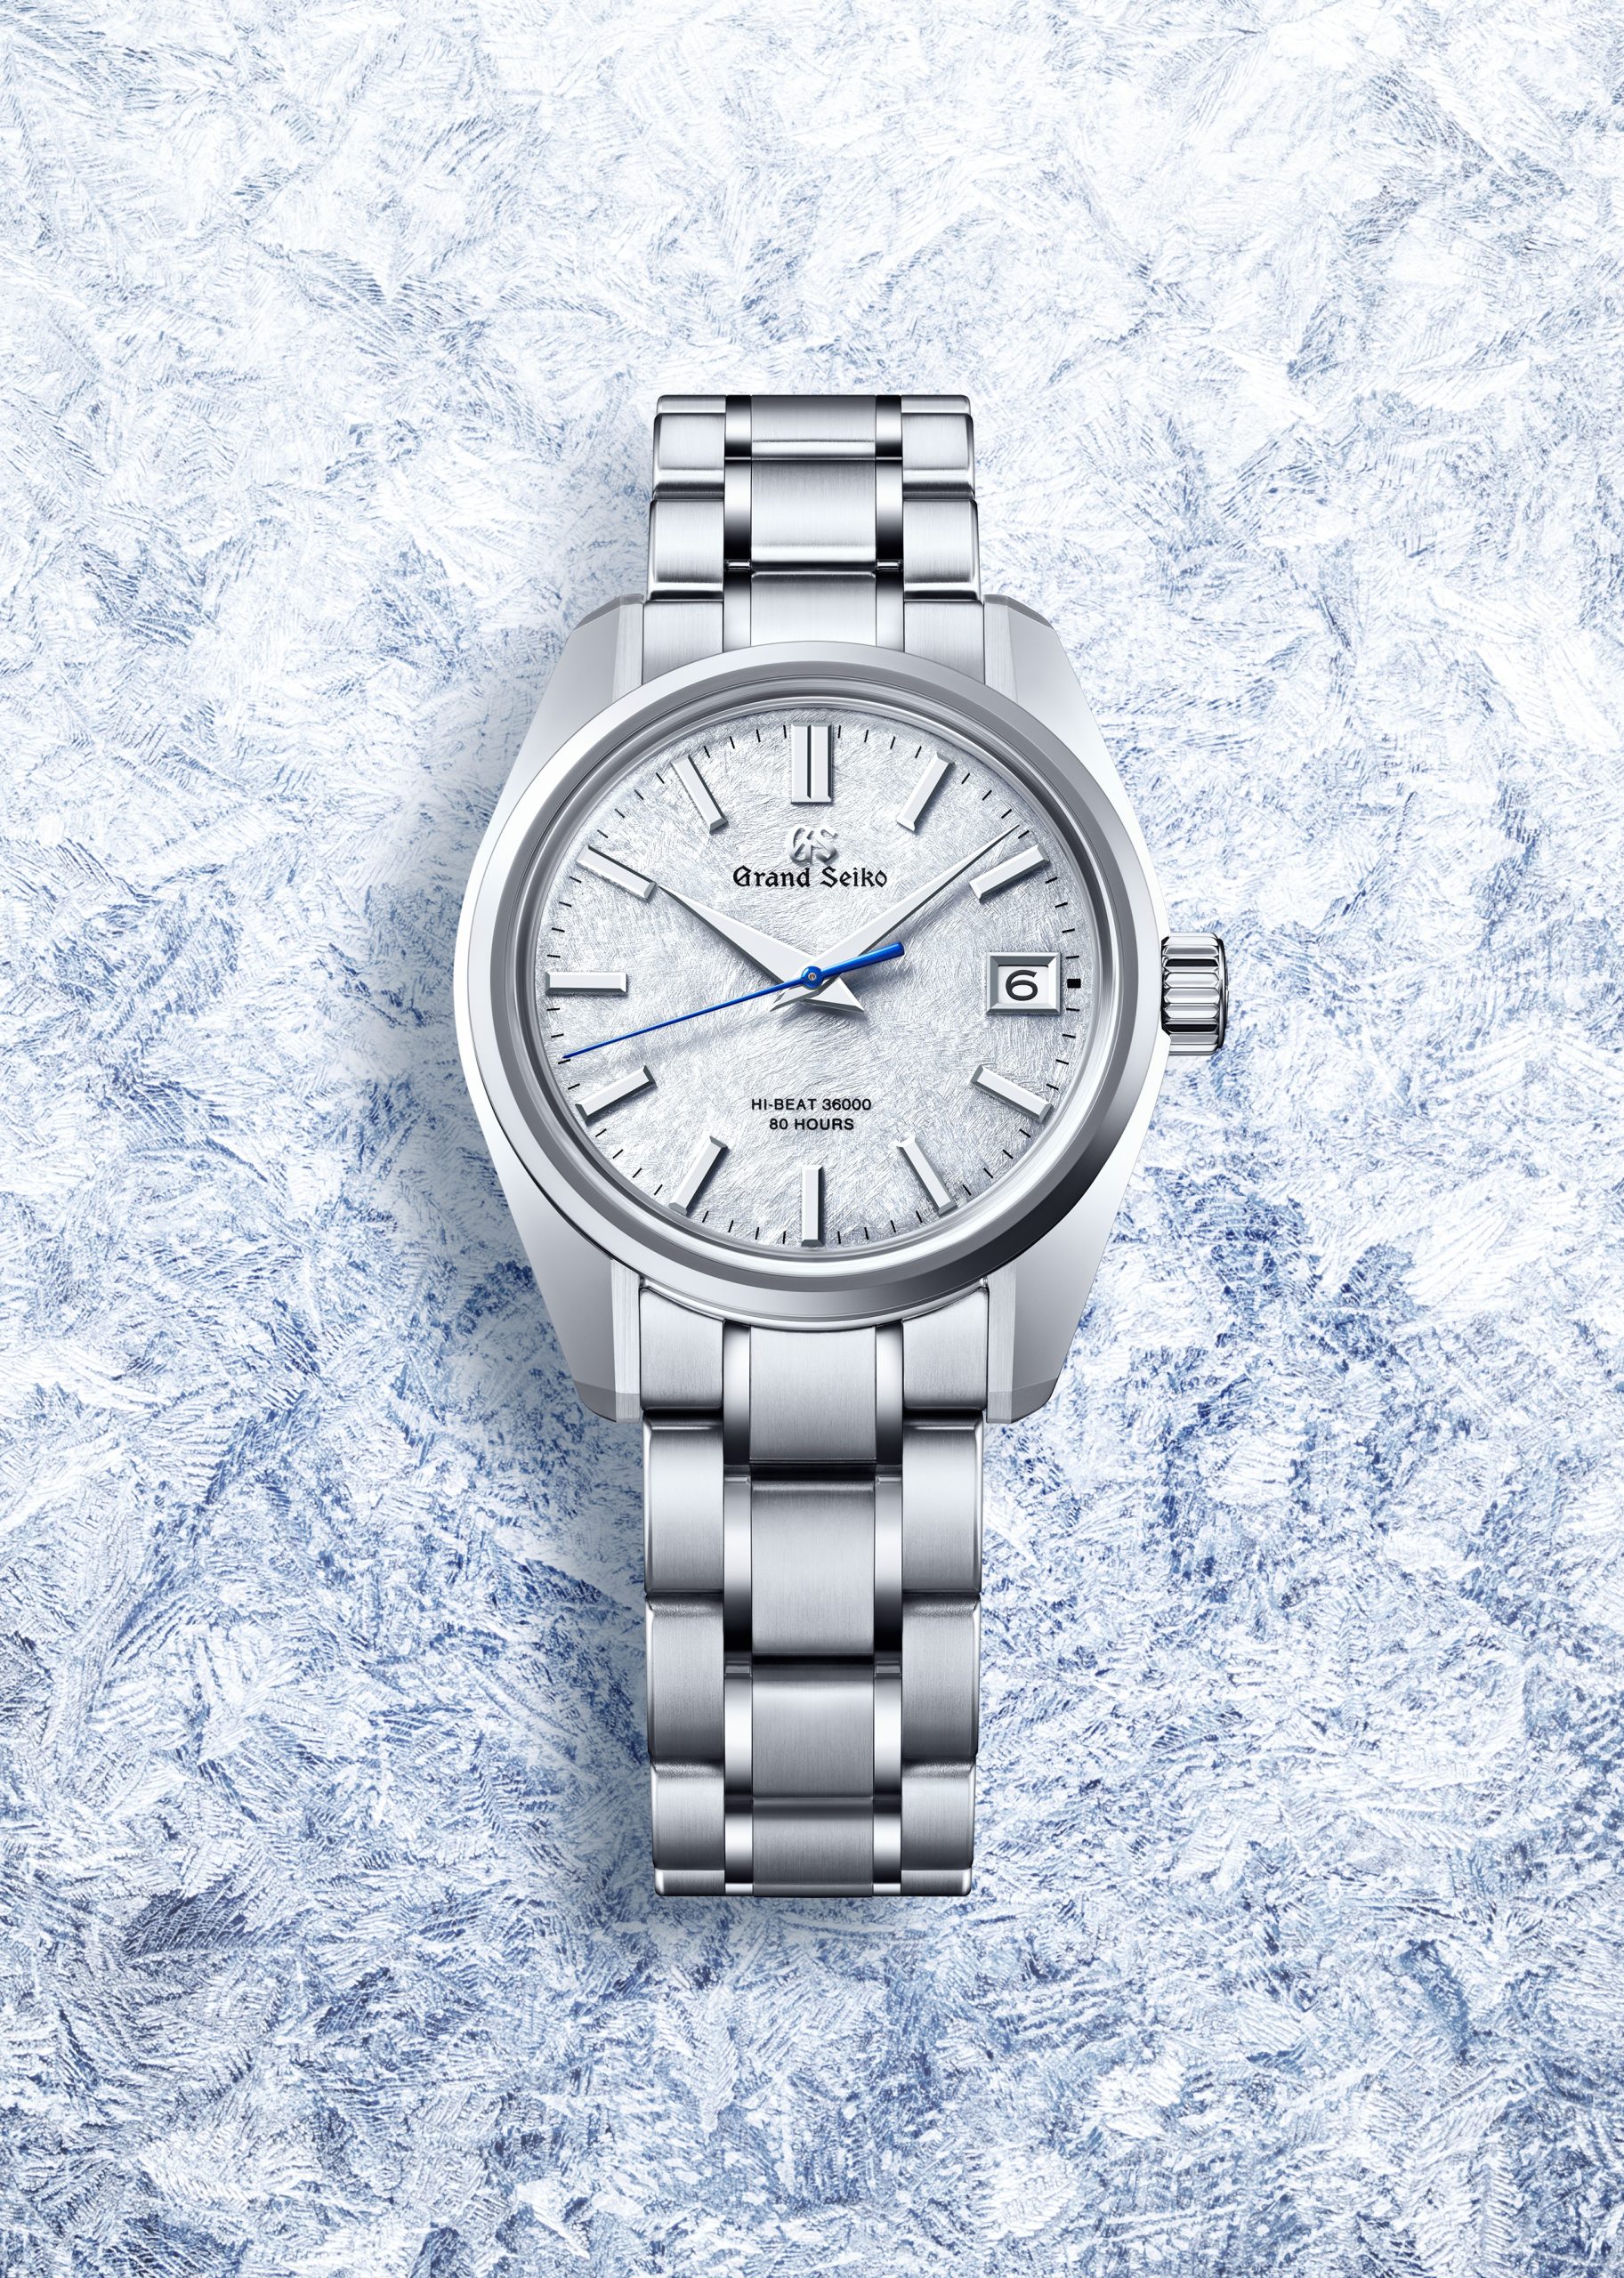 Grand Seiko's newest 44Gs is the SLGH013. 